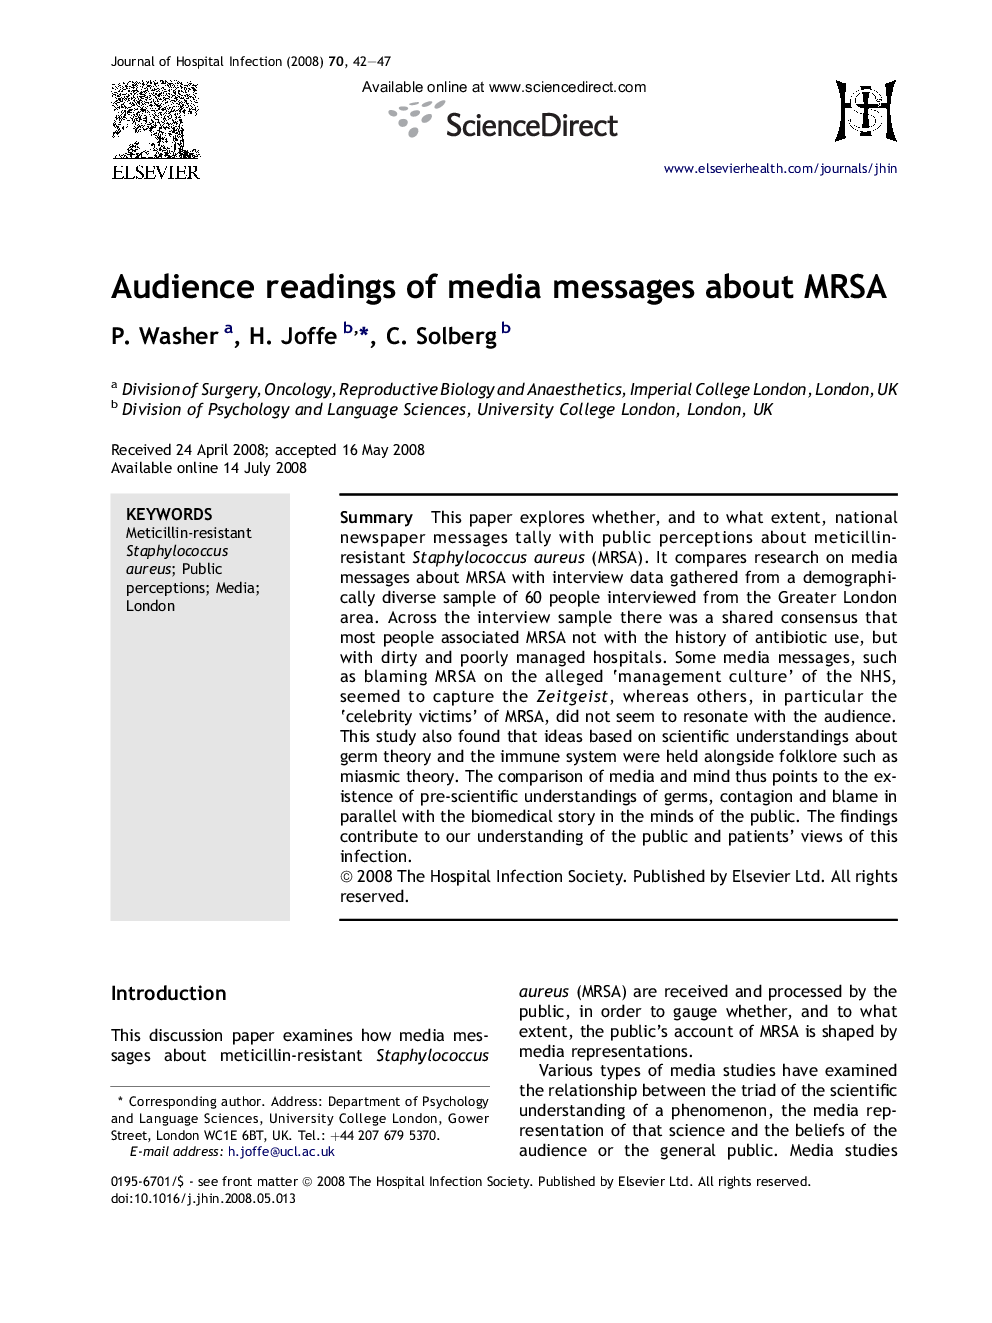 Audience readings of media messages about MRSA